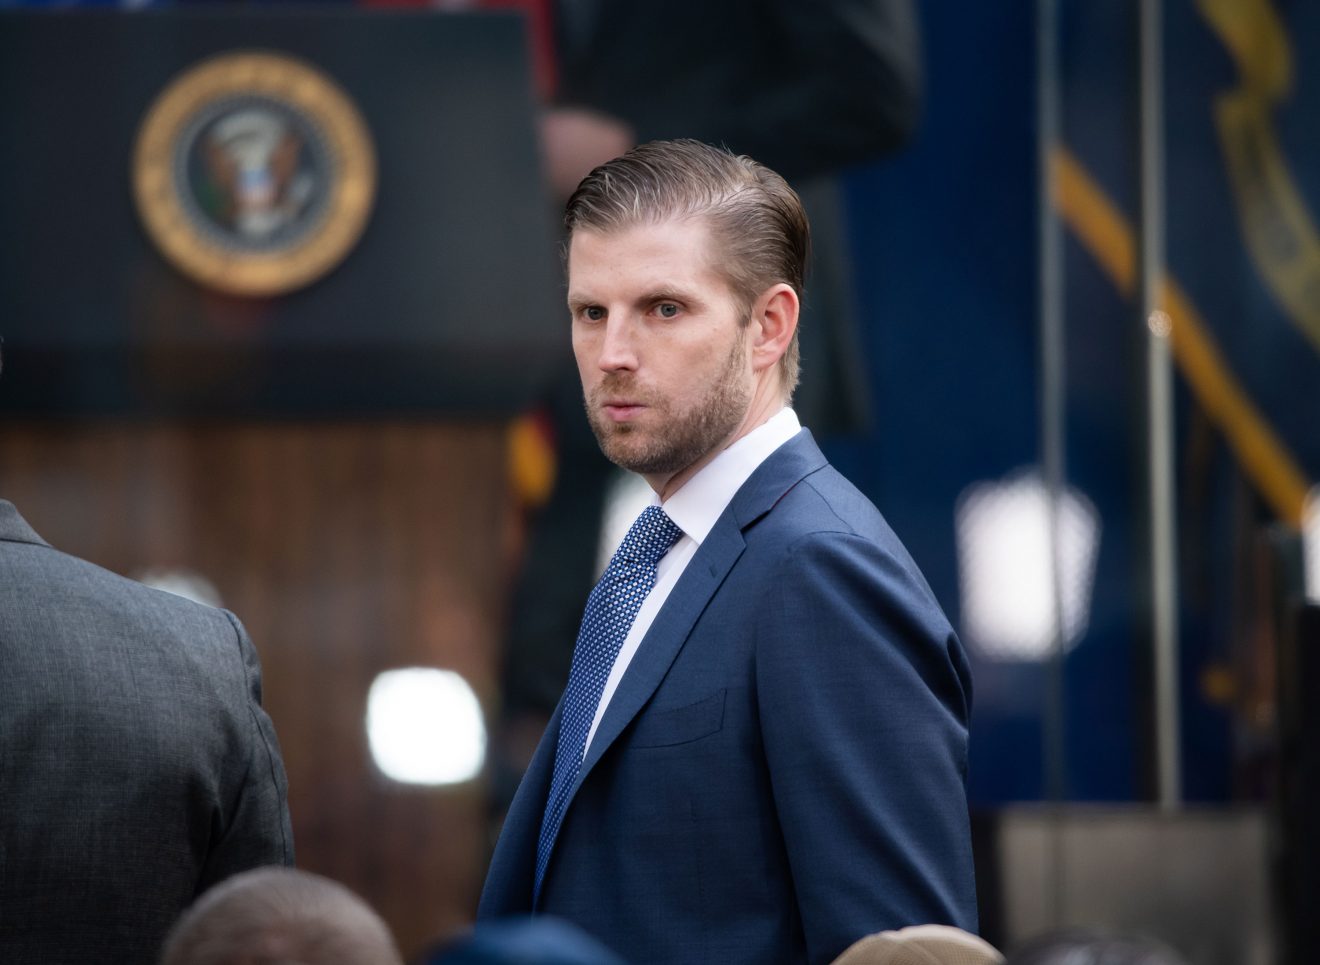 Who is Eric Trump? Check Eric Trump Net Worth, Wiki, Biography, & Personal Life Relationship